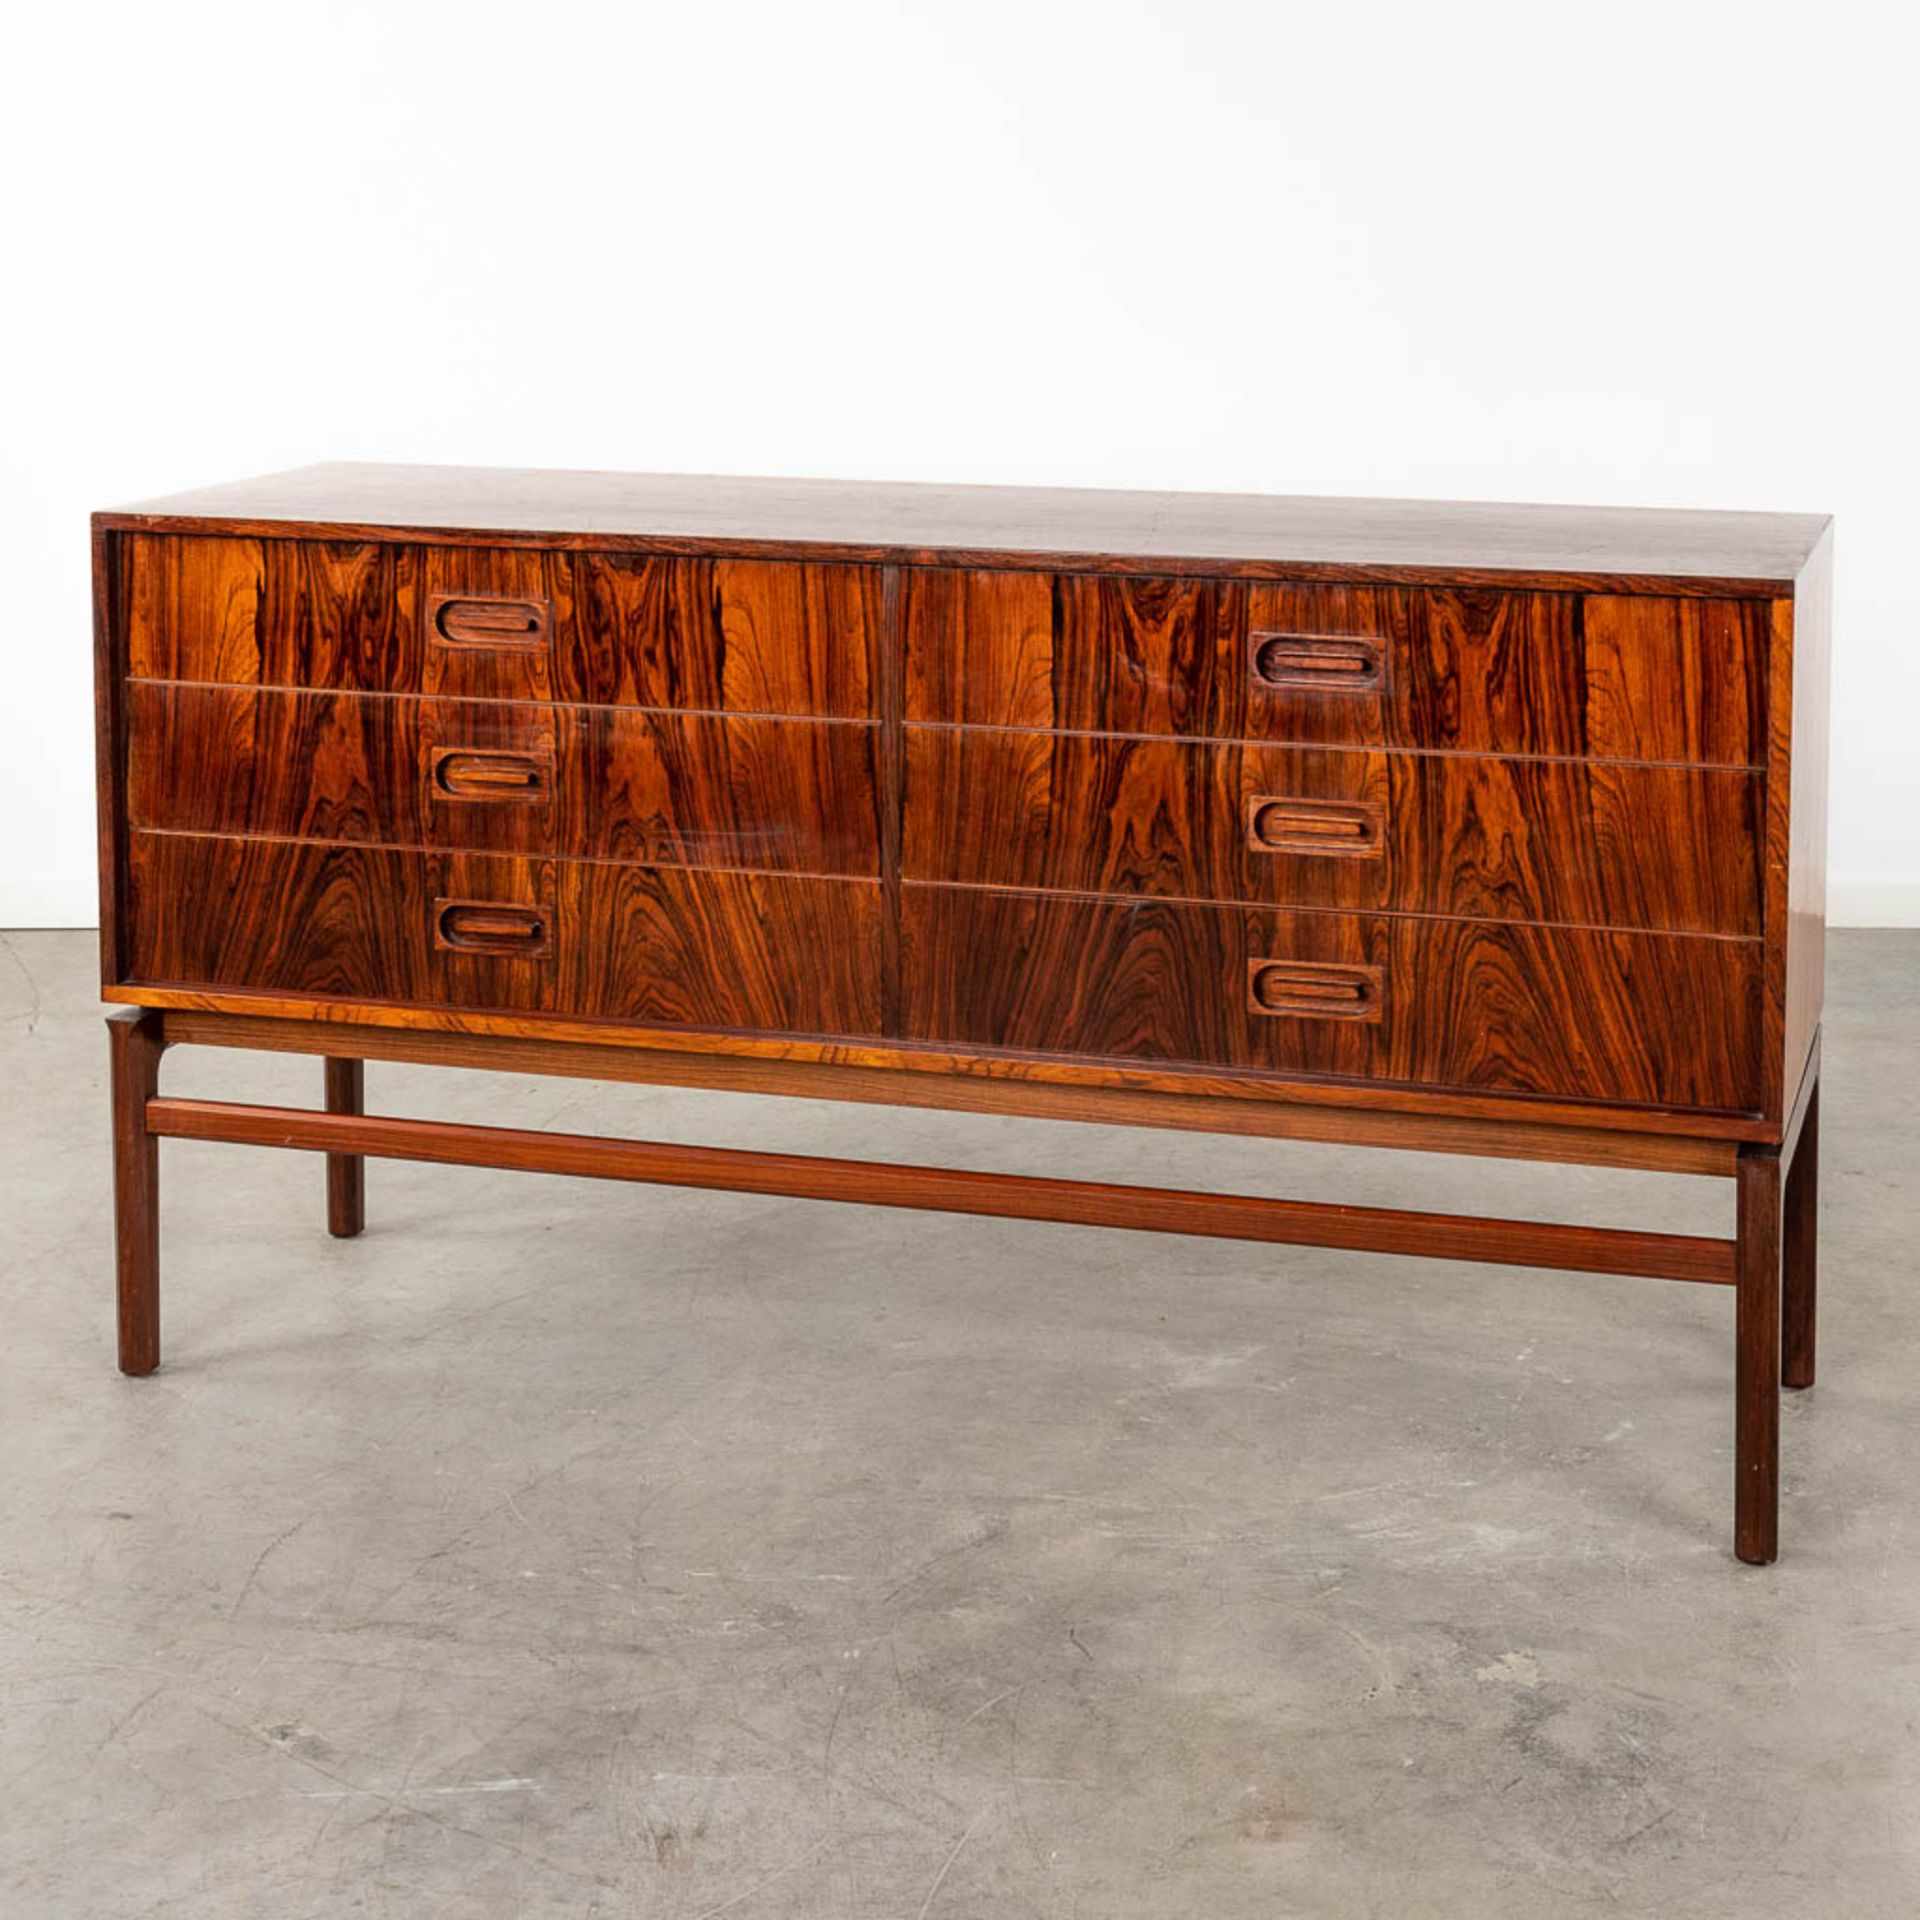 A mid-century Scandinavian Sideboard with 6 drawers, and rosewood veneer. (D:45 x W:150 x H:80 cm)